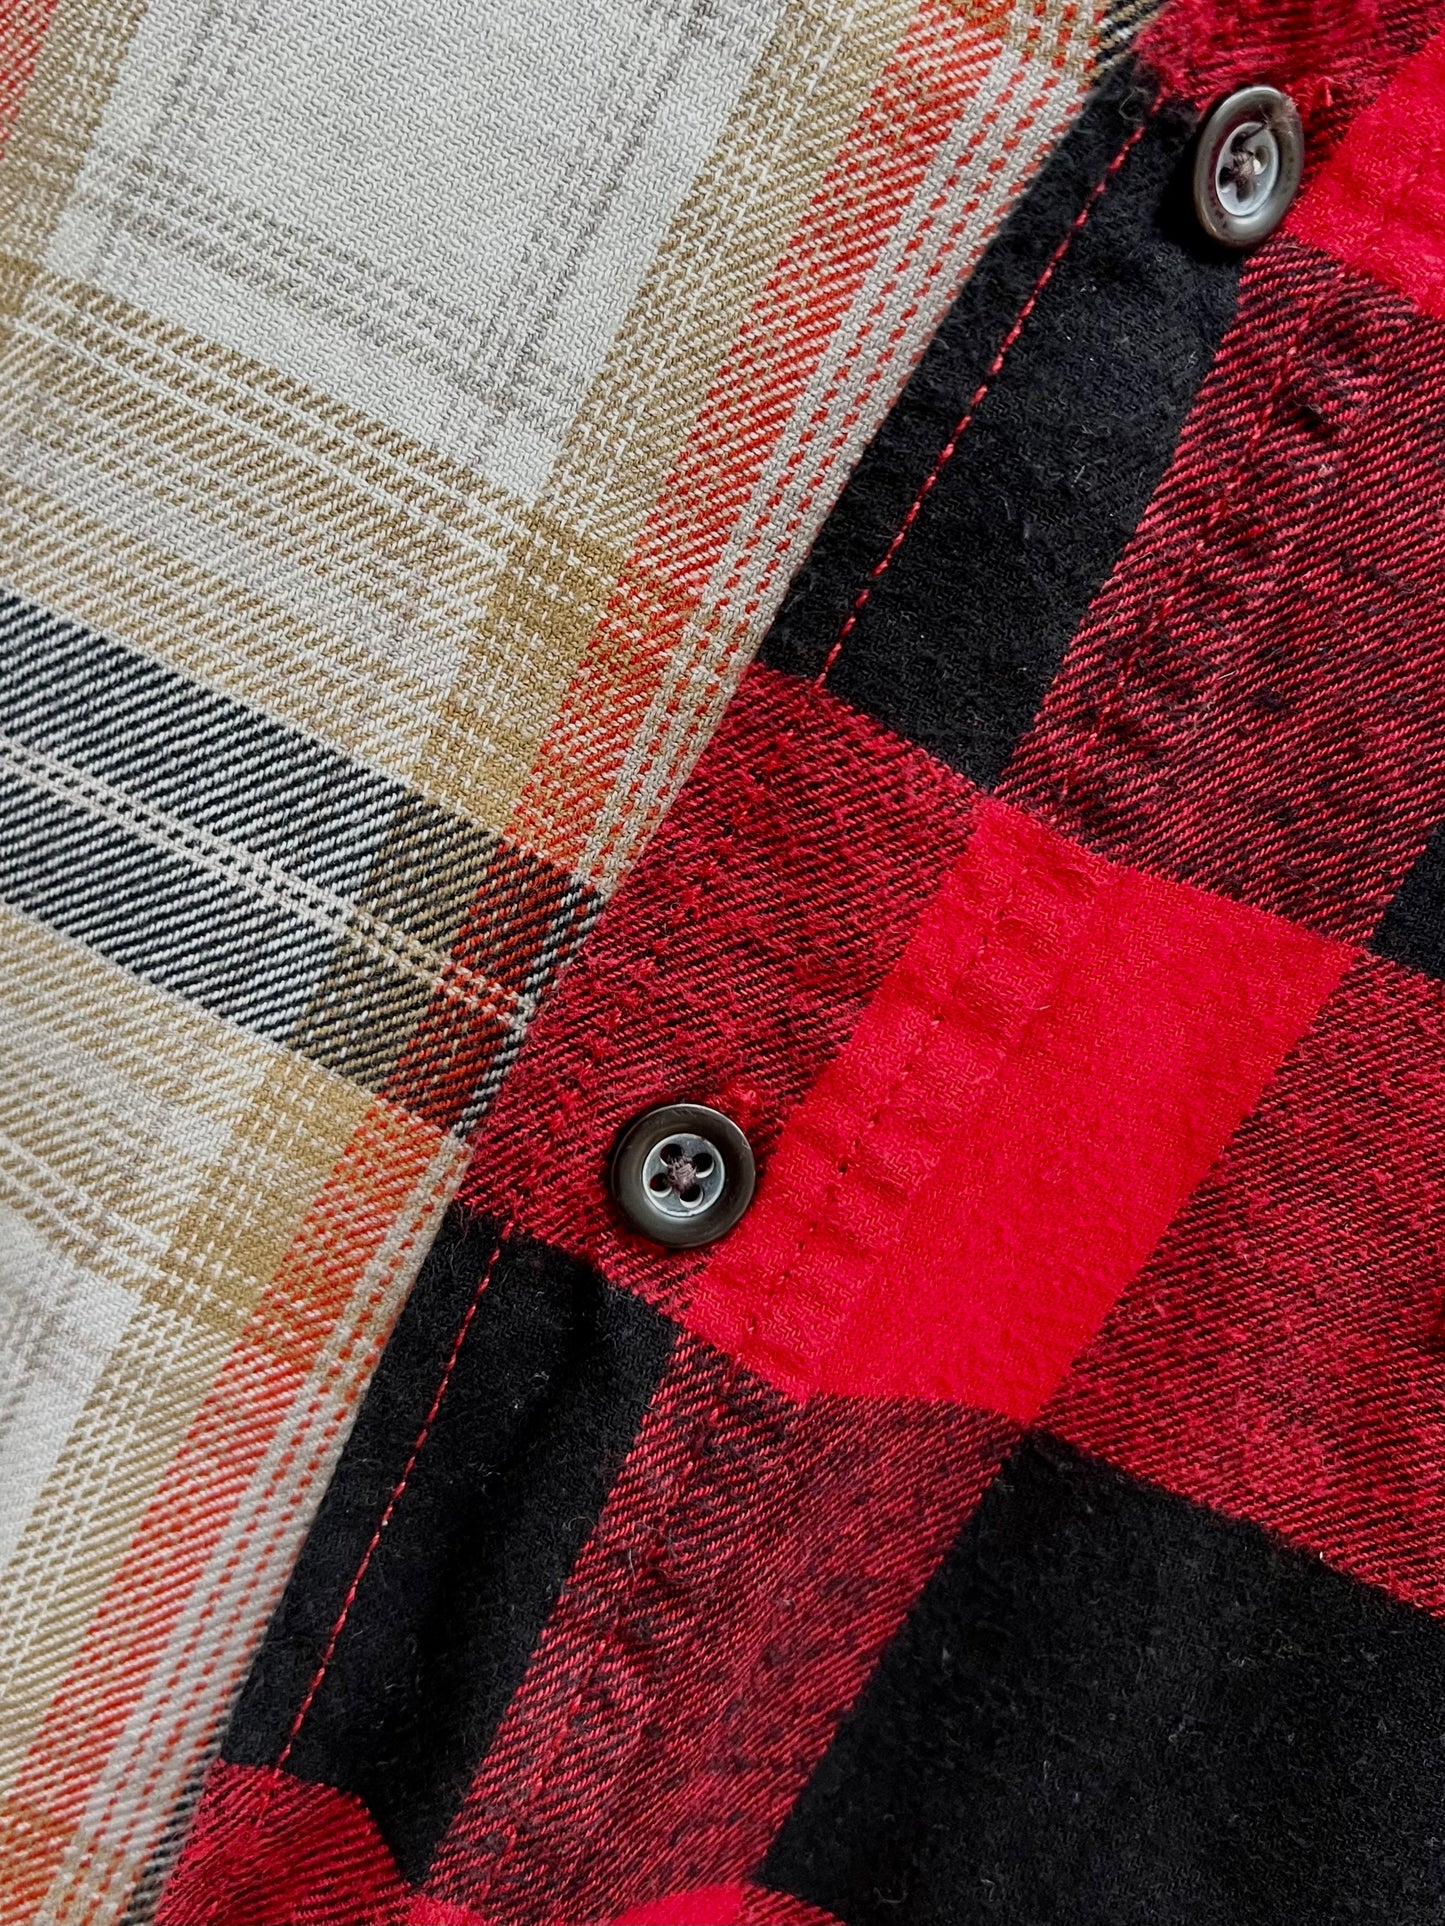 Red and neutral reworked check shirt